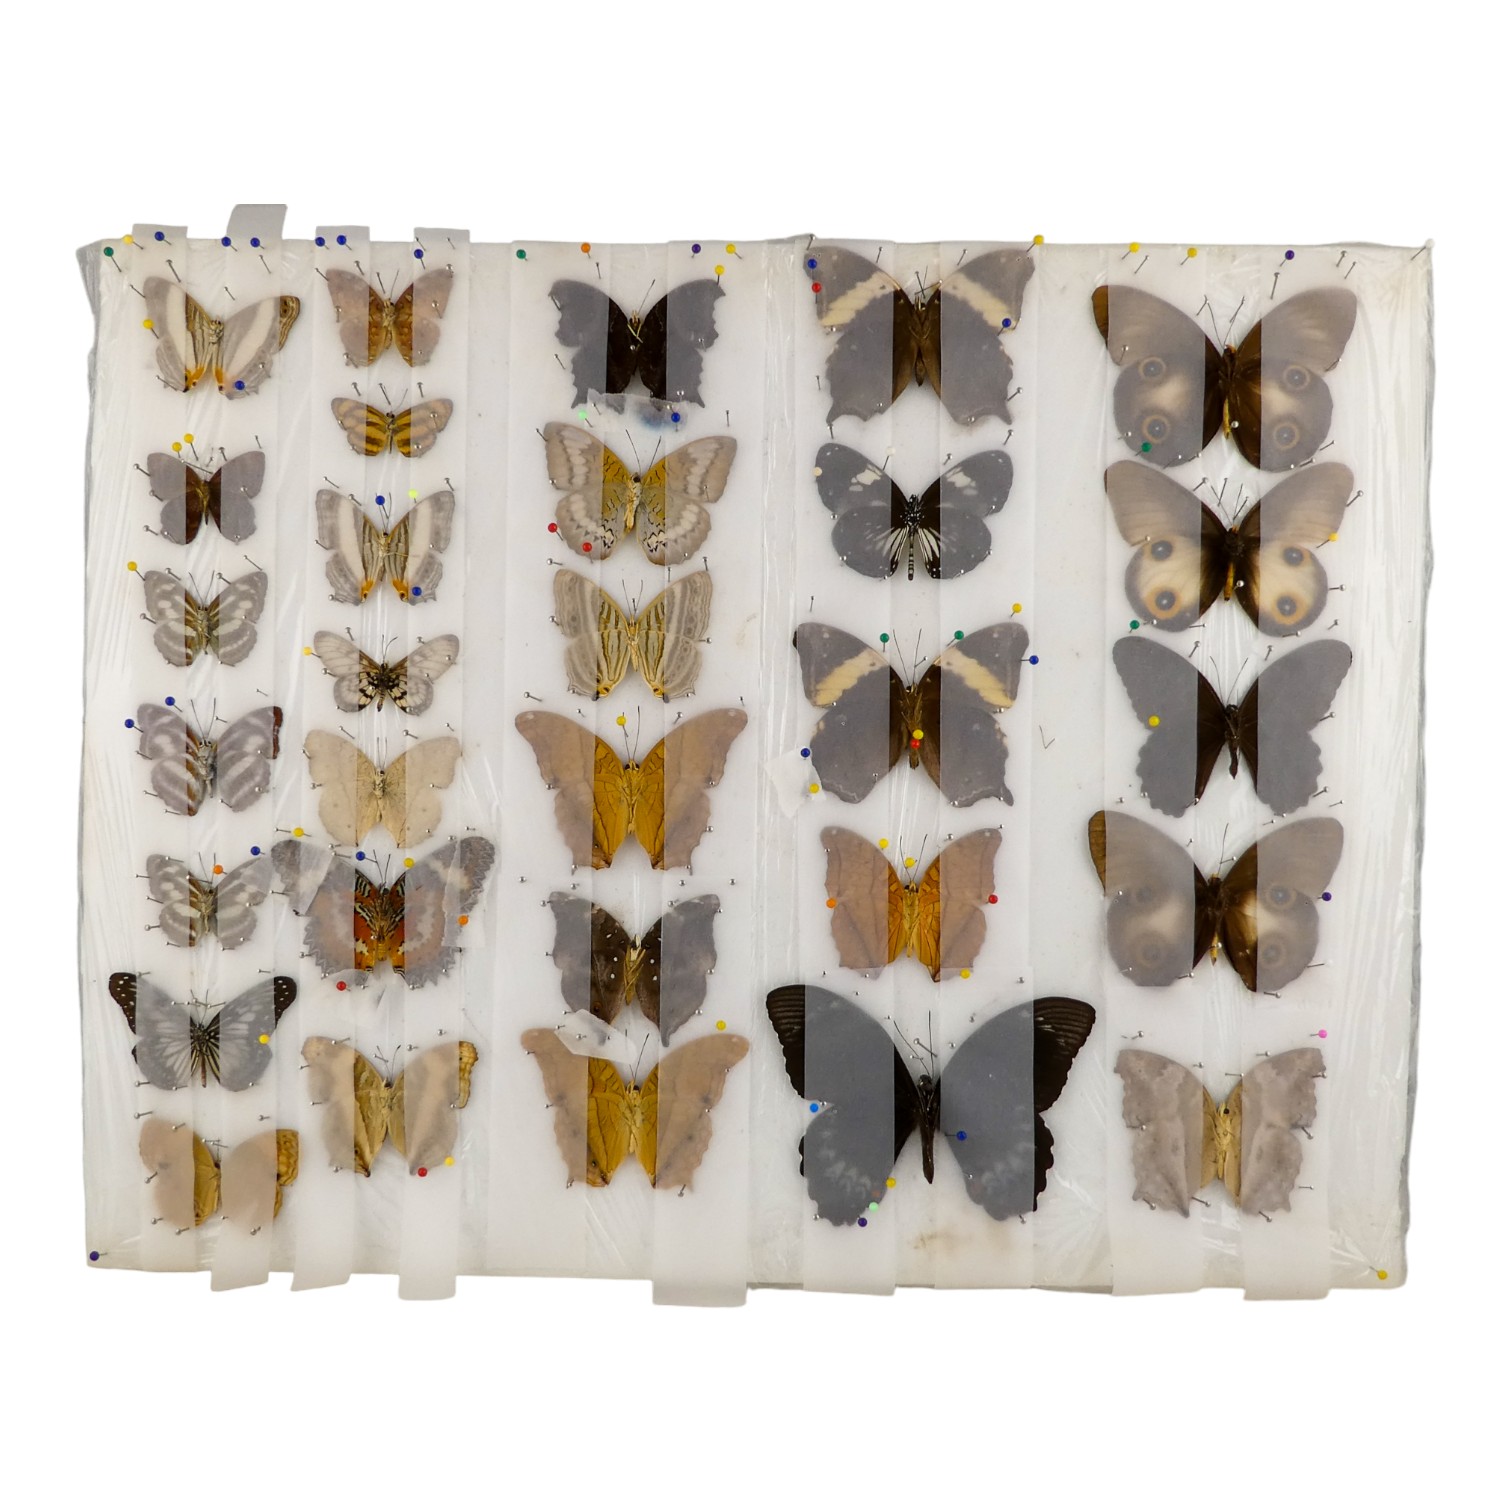 Five rows of butterflies pinned and ready to mount